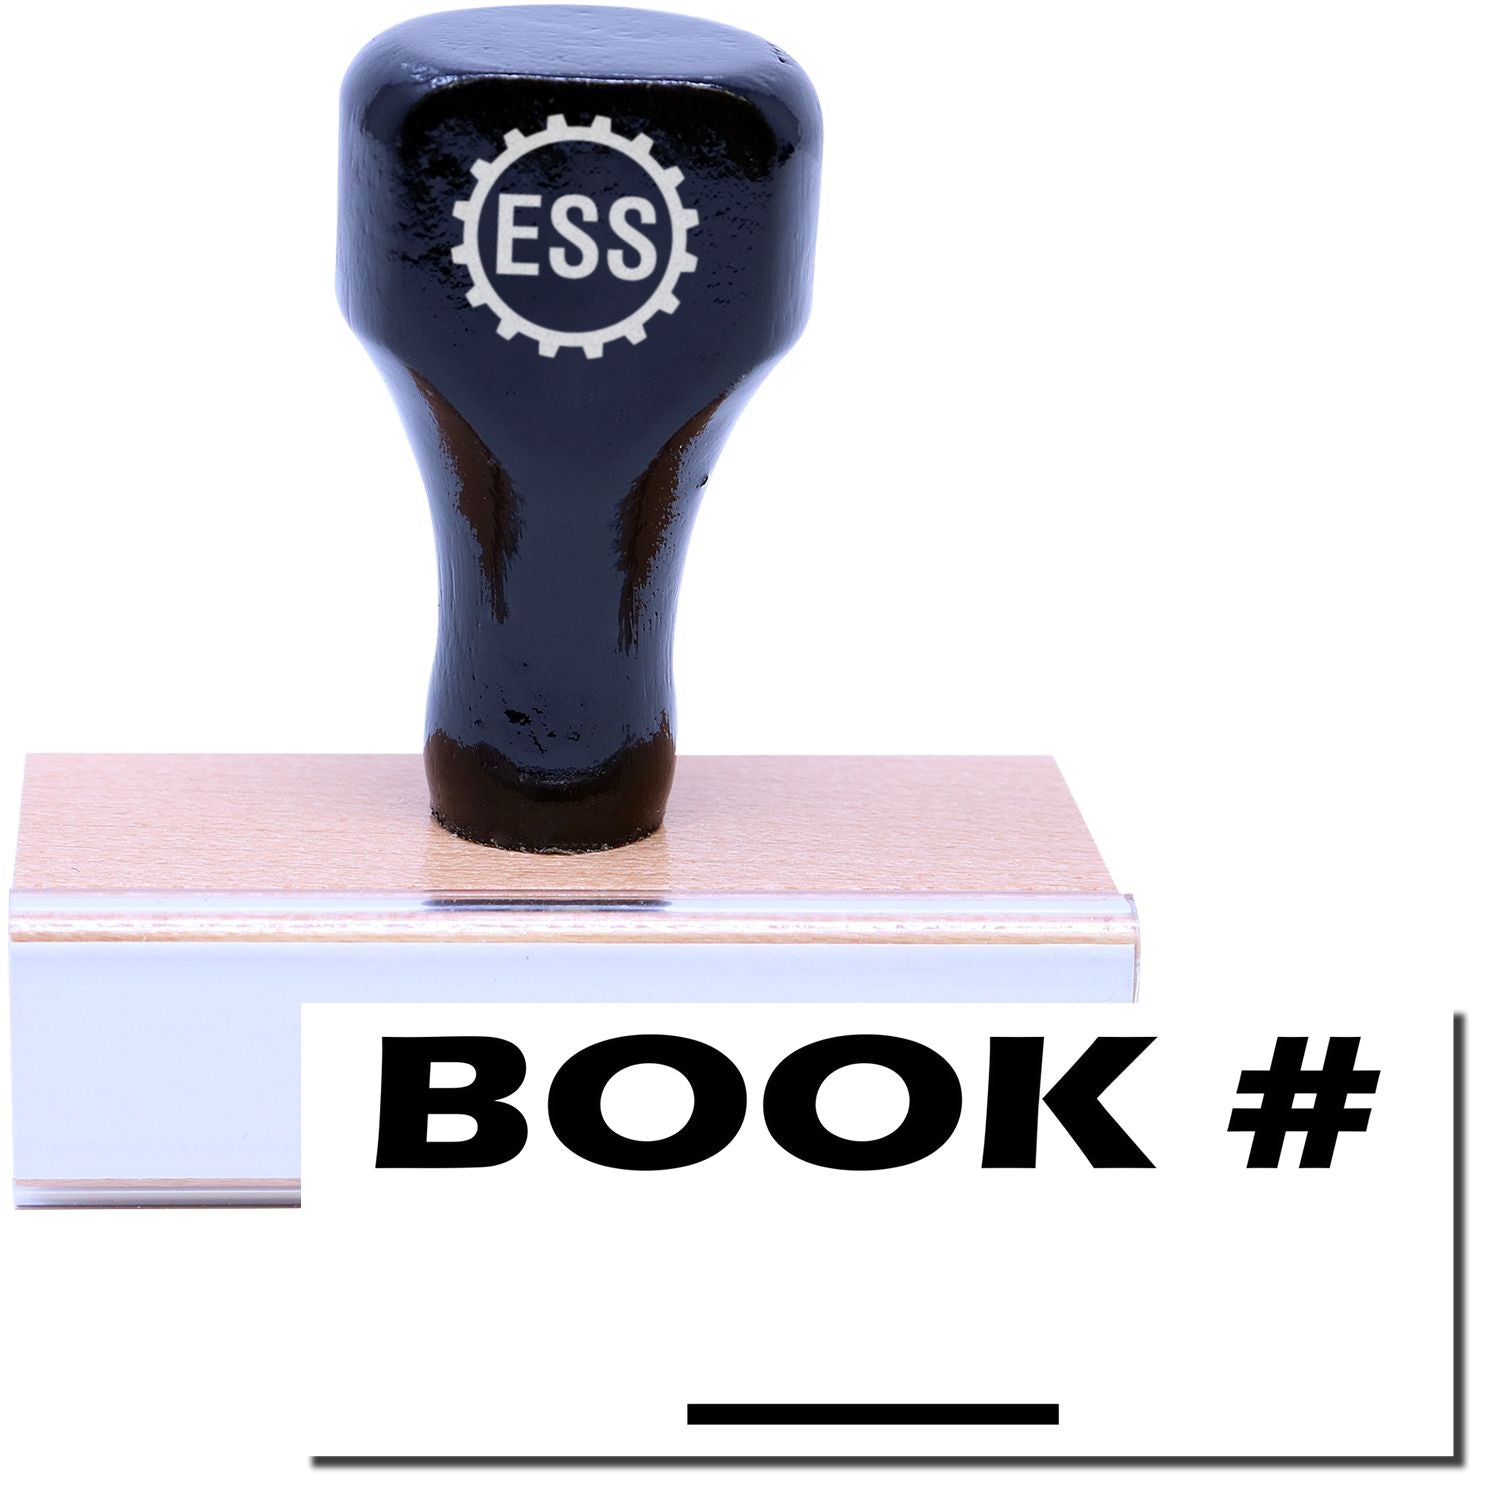 A stock office rubber stamp with a stamped image showing how the text "BOOK #" with a line under it is displayed after stamping.